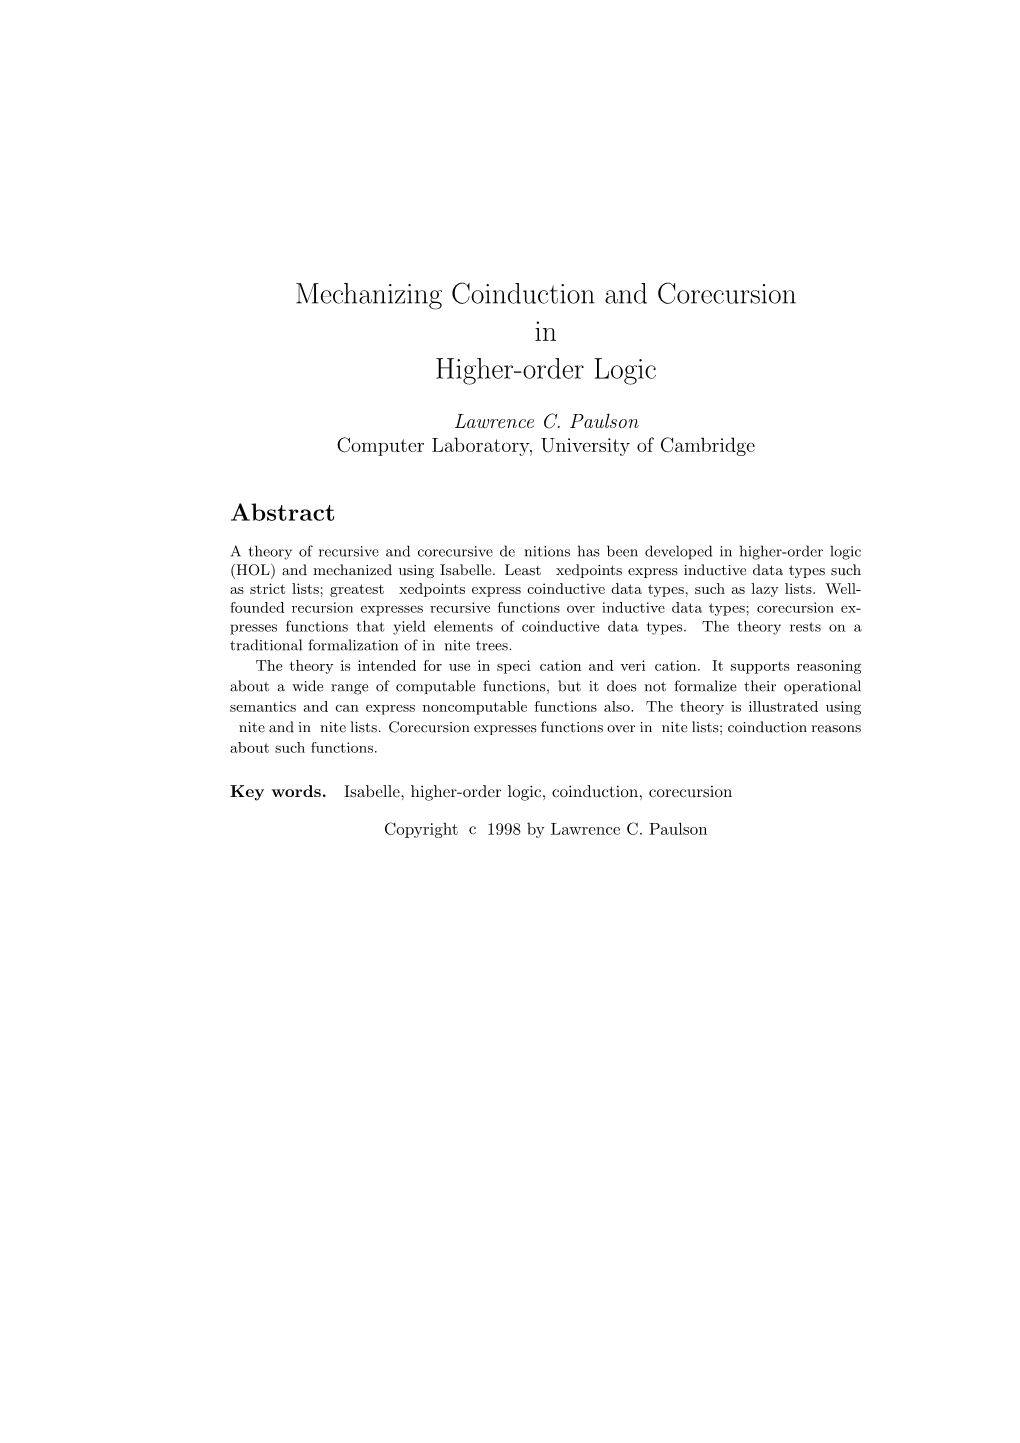 Mechanizing Coinduction and Corecursion in Higher-Order Logic